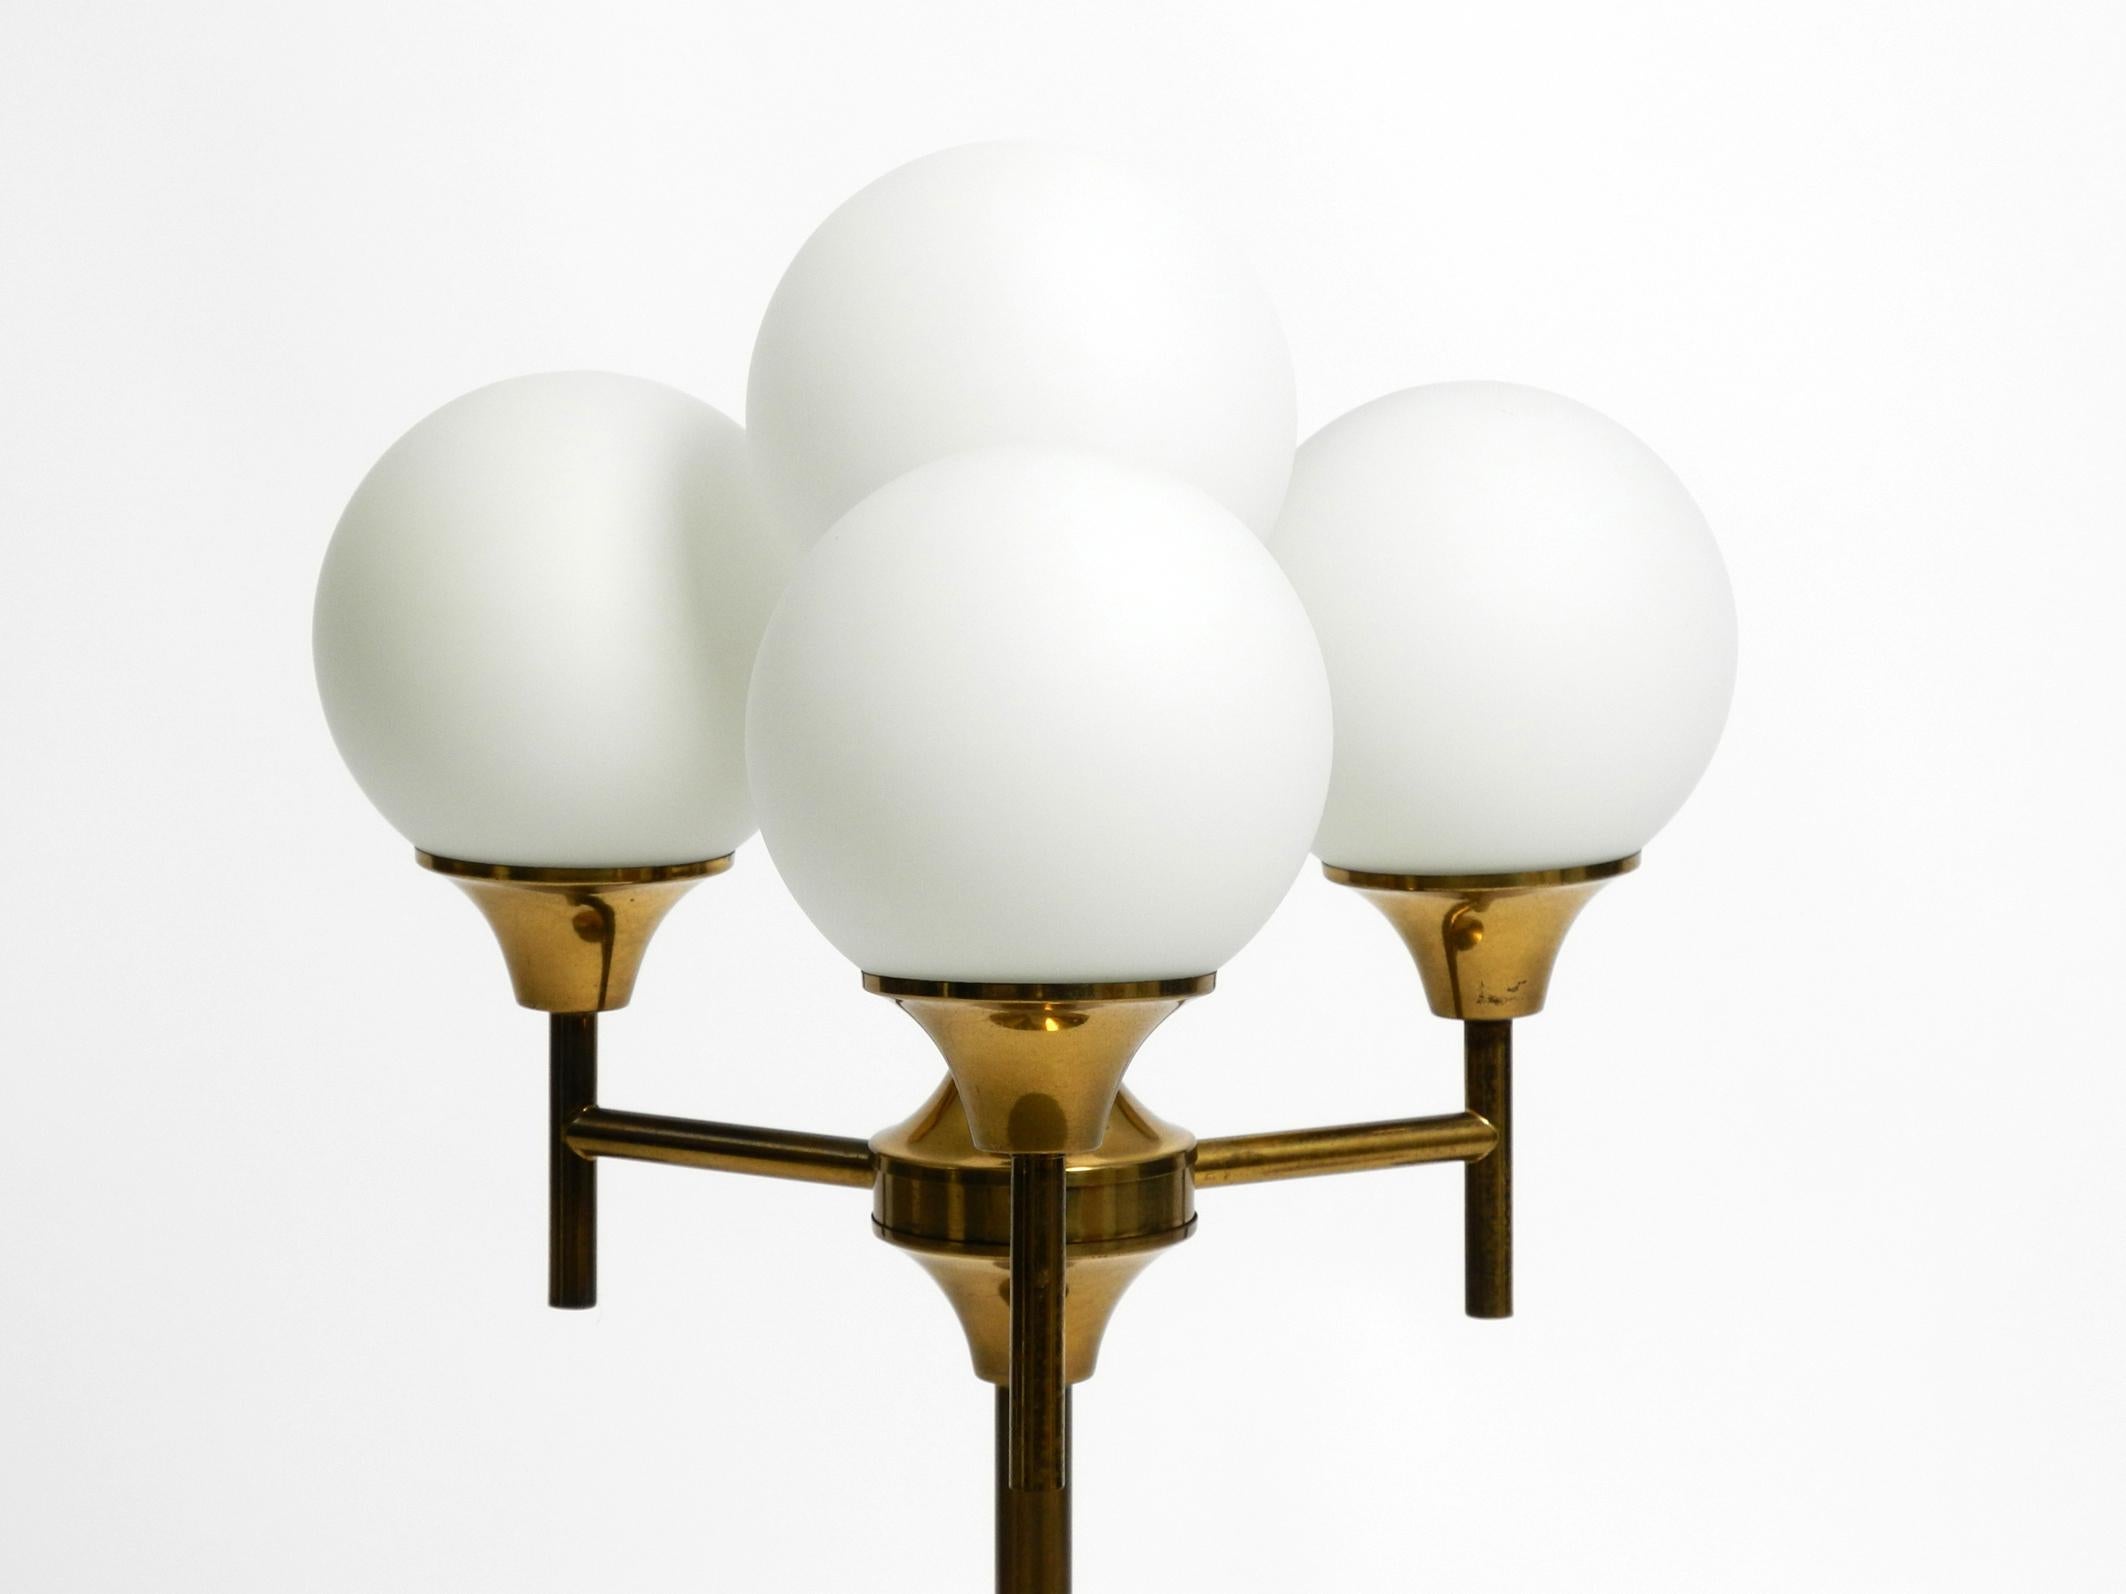 Large 1960s brass table or floor lamp with 4 glass spheres by Kaiser Leuchten In Good Condition For Sale In München, DE